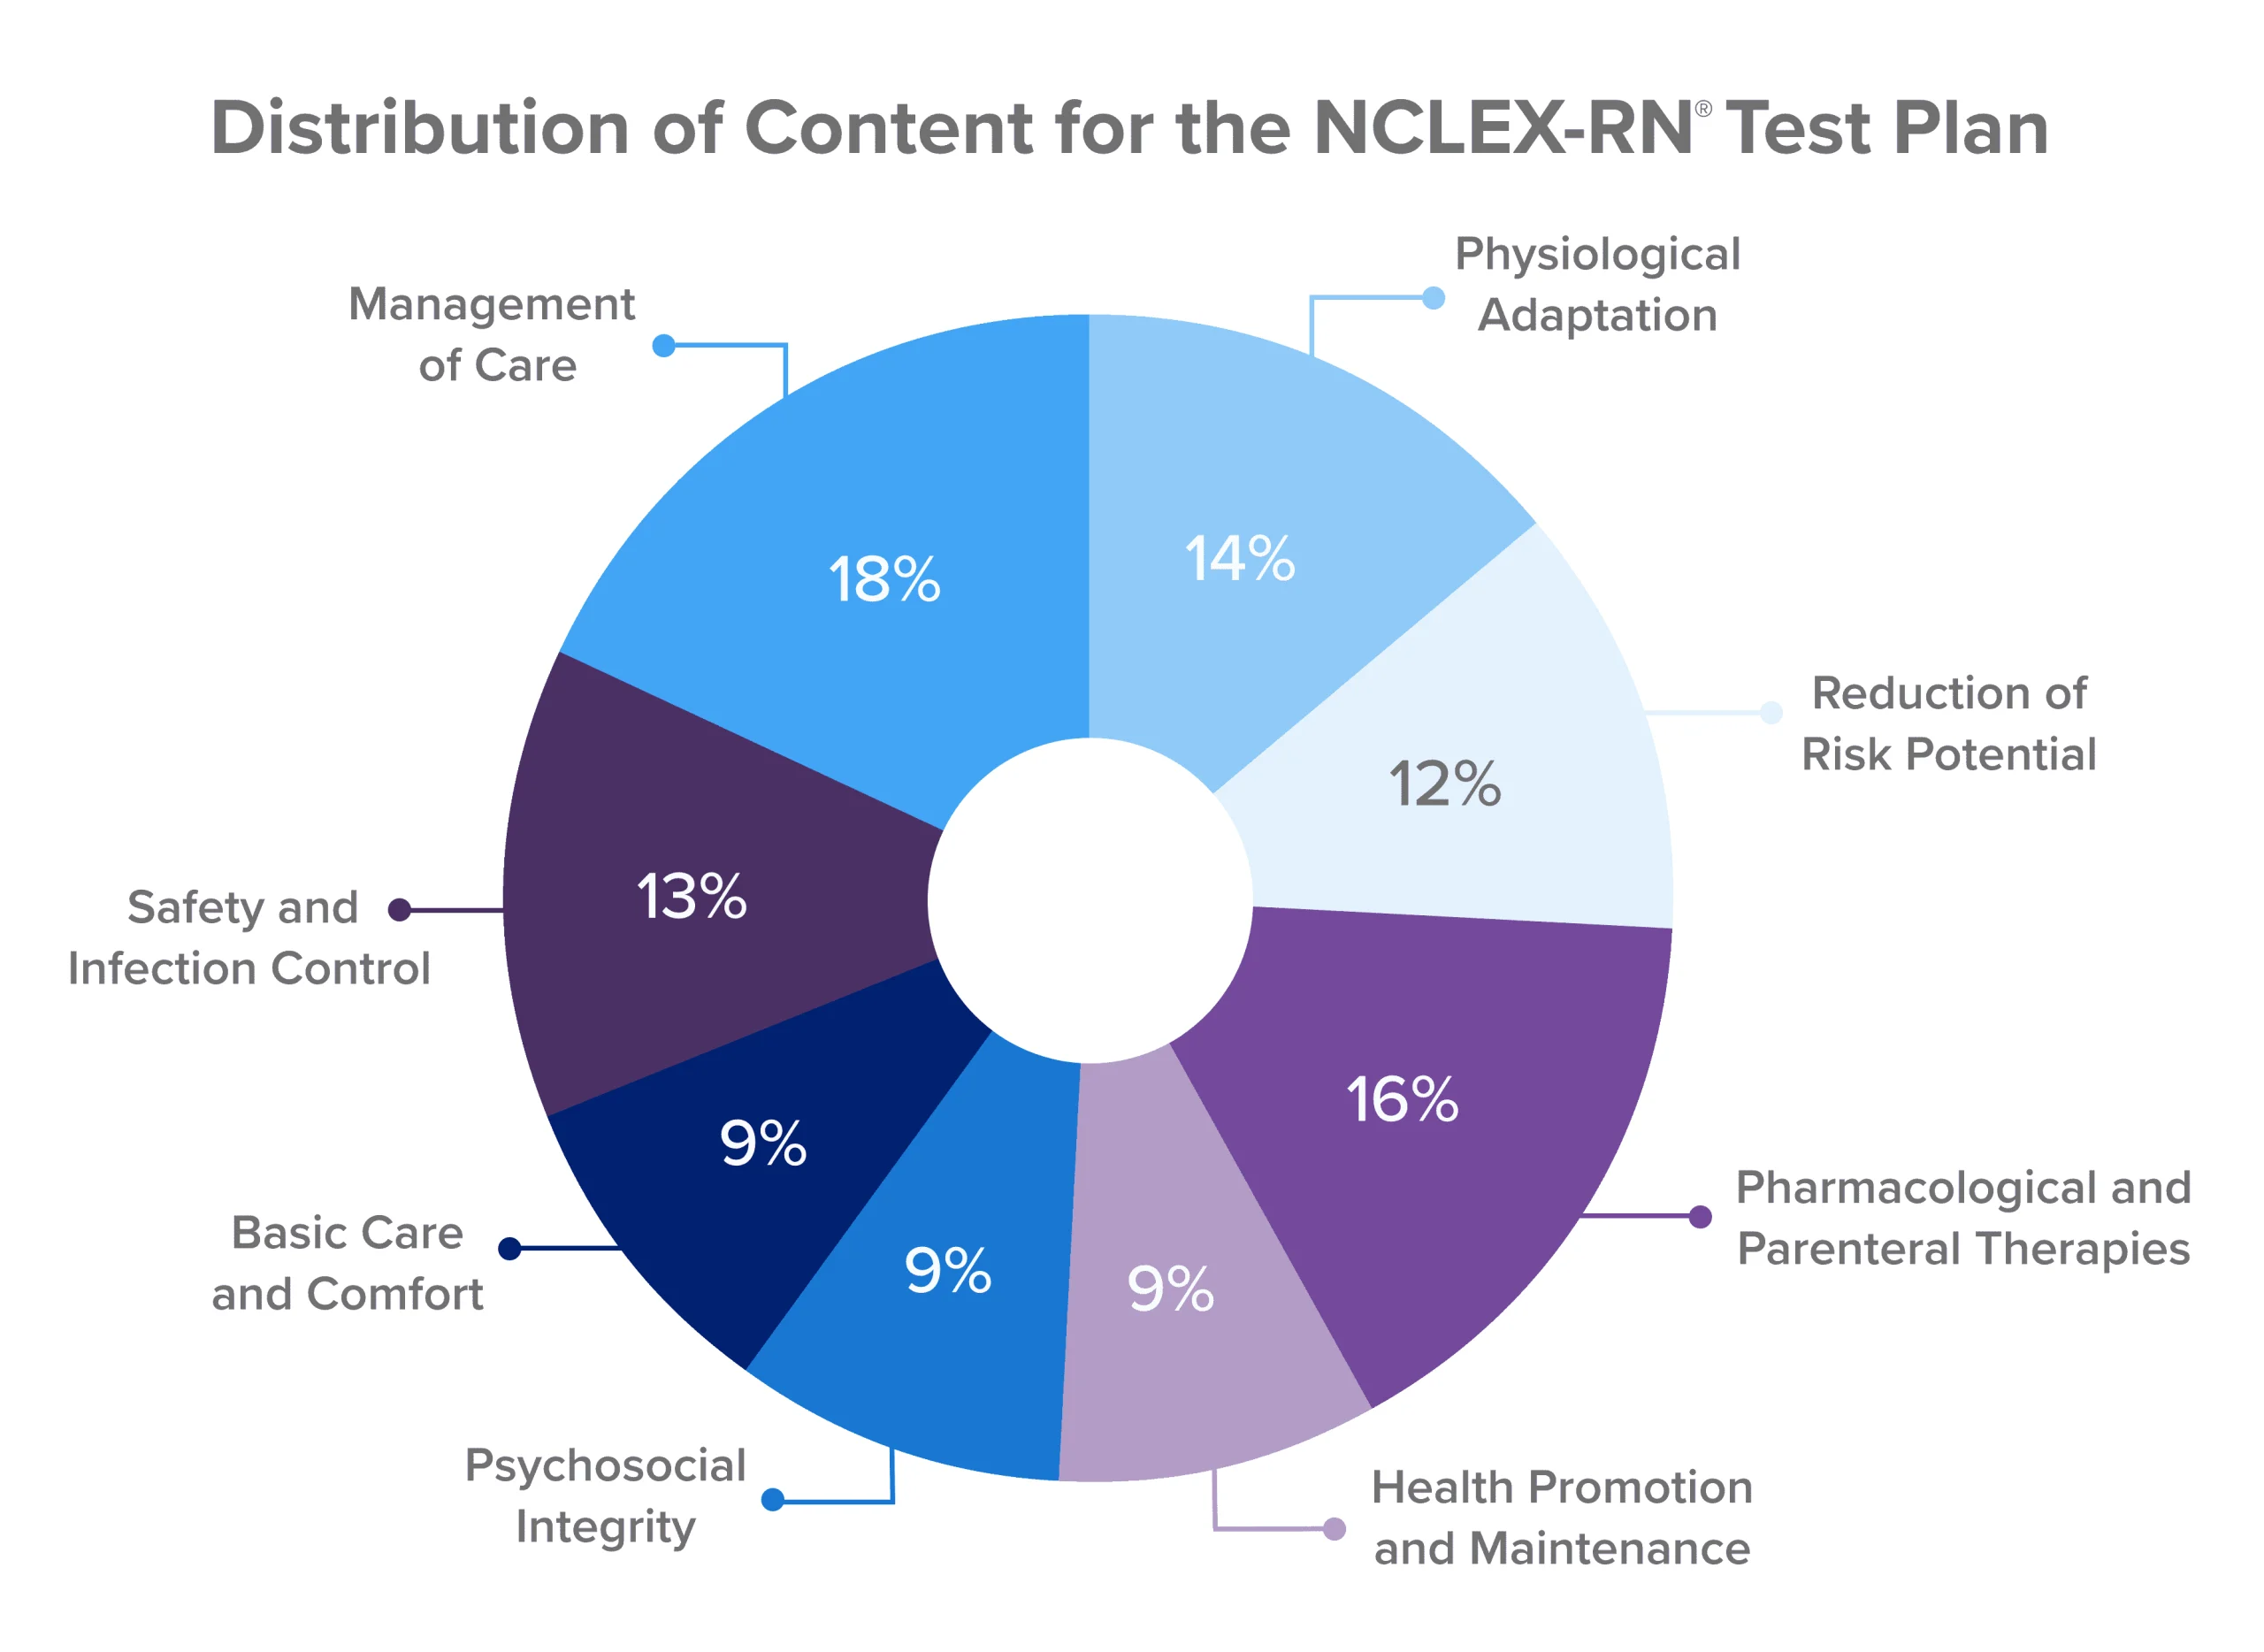 Pie chart of Distribution of Content for the NCLEX-RN Test Plan